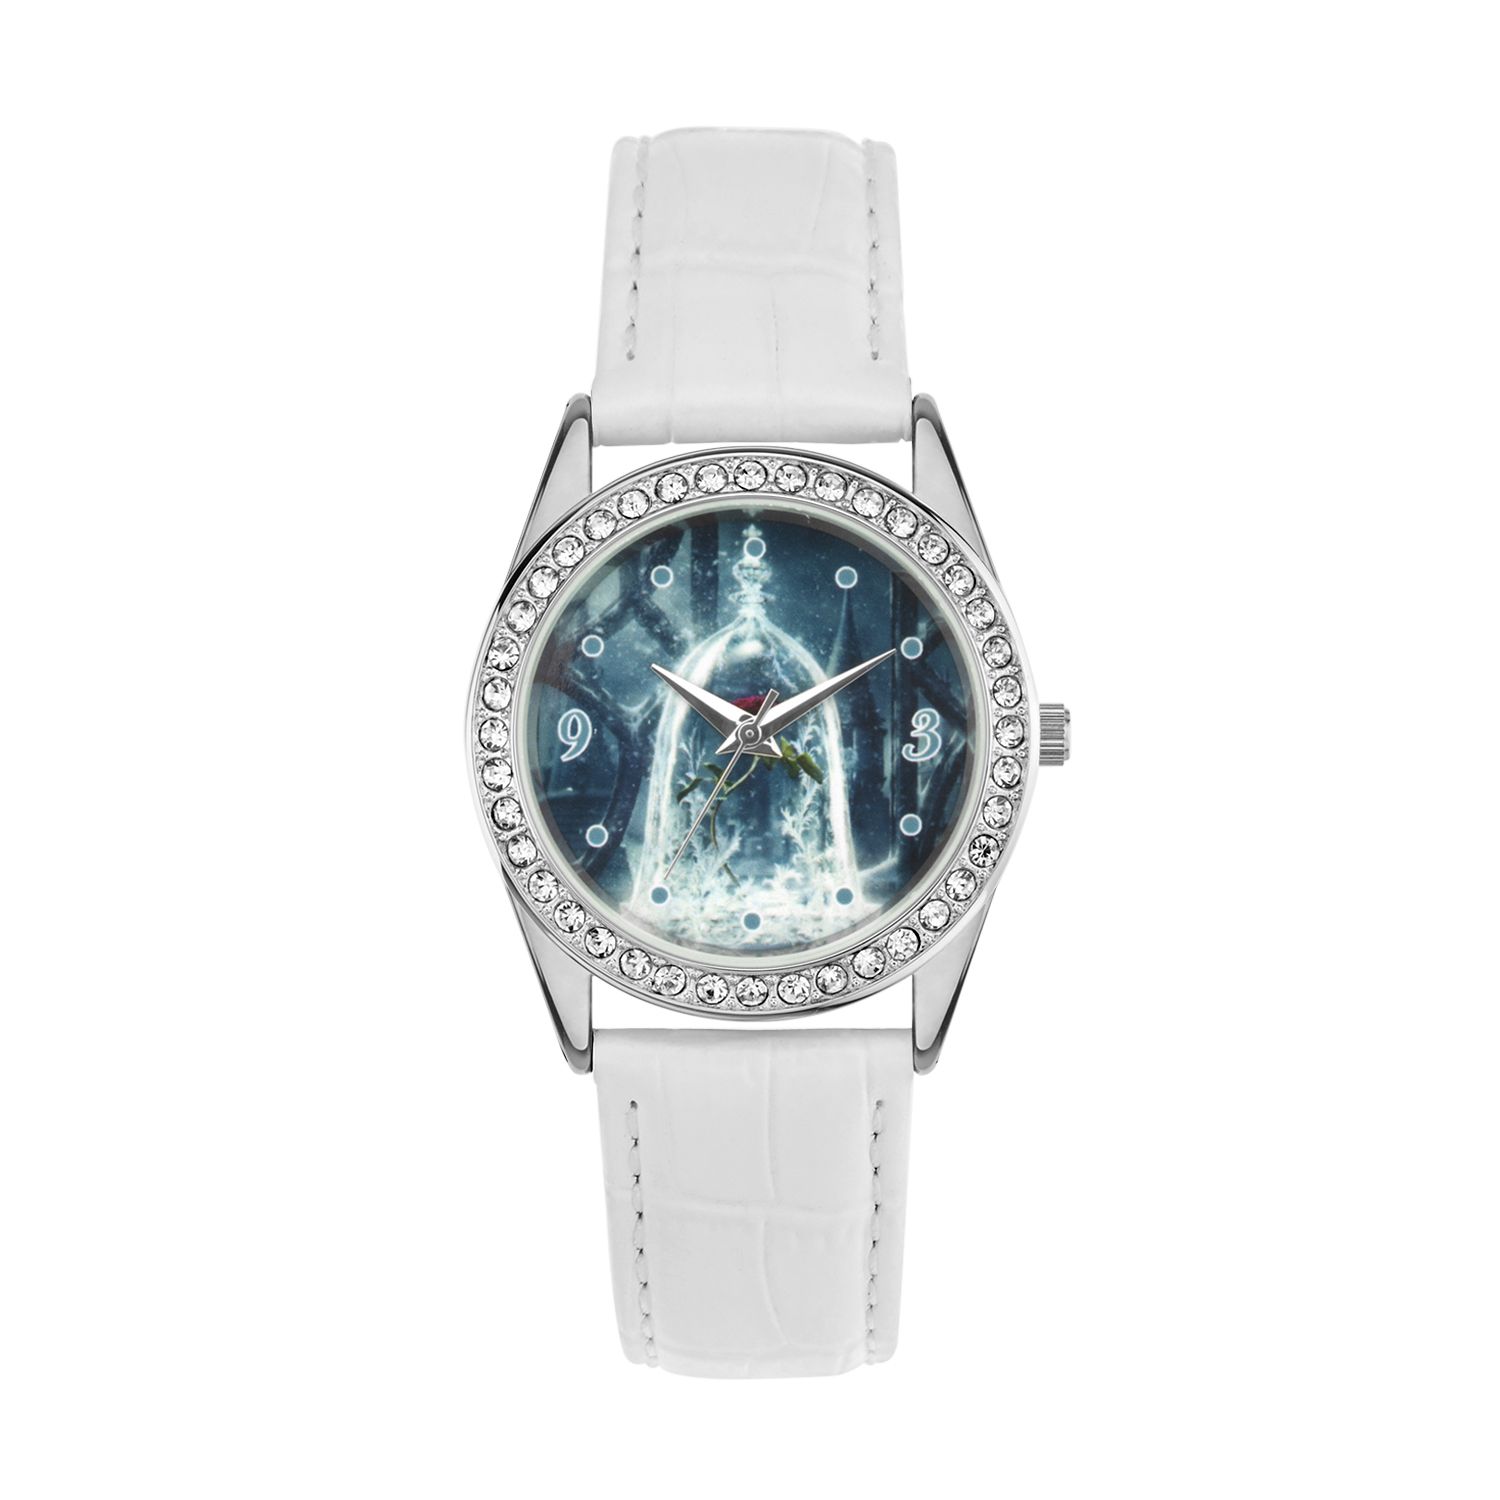 Image for Disney 's Beauty and the Beast Enchanted Rose Women's Crystal Leather Watch at Kohl's.